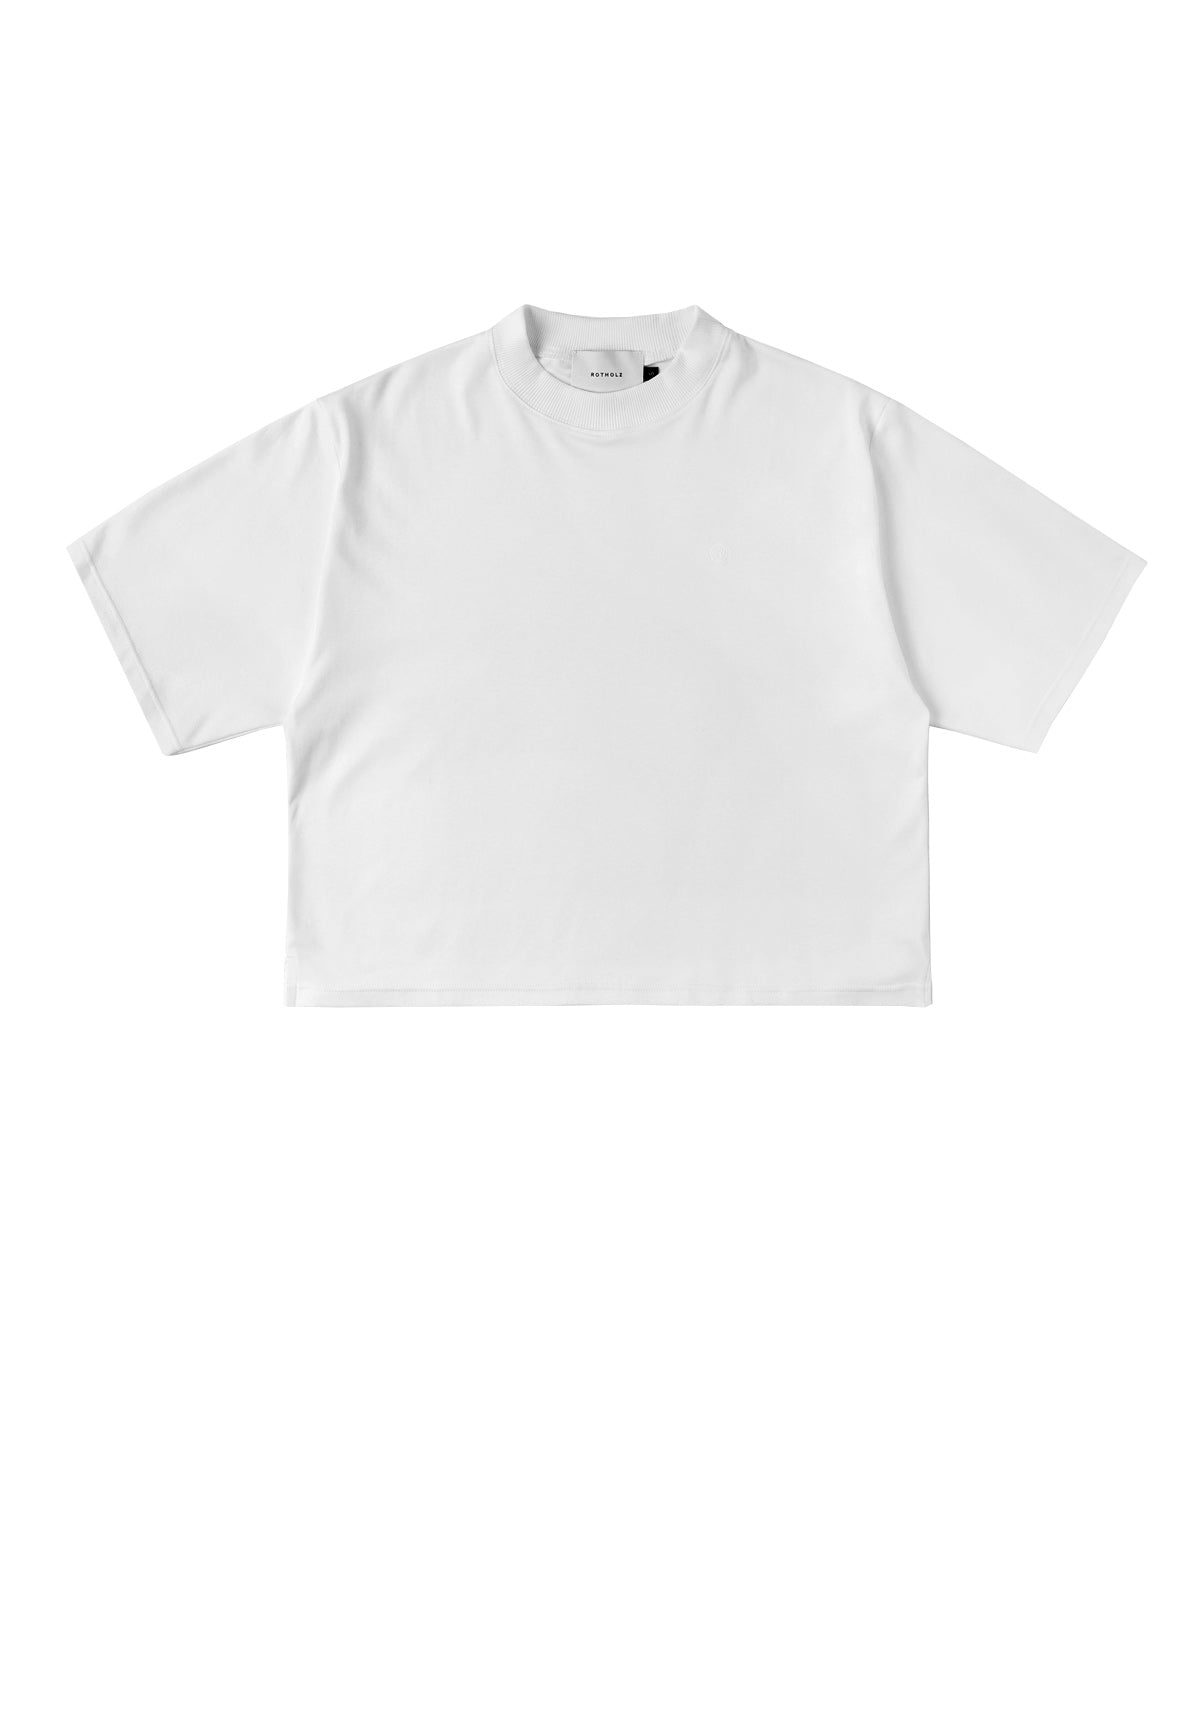 CROPPED RIGHTS T-SHIRT - Moeon